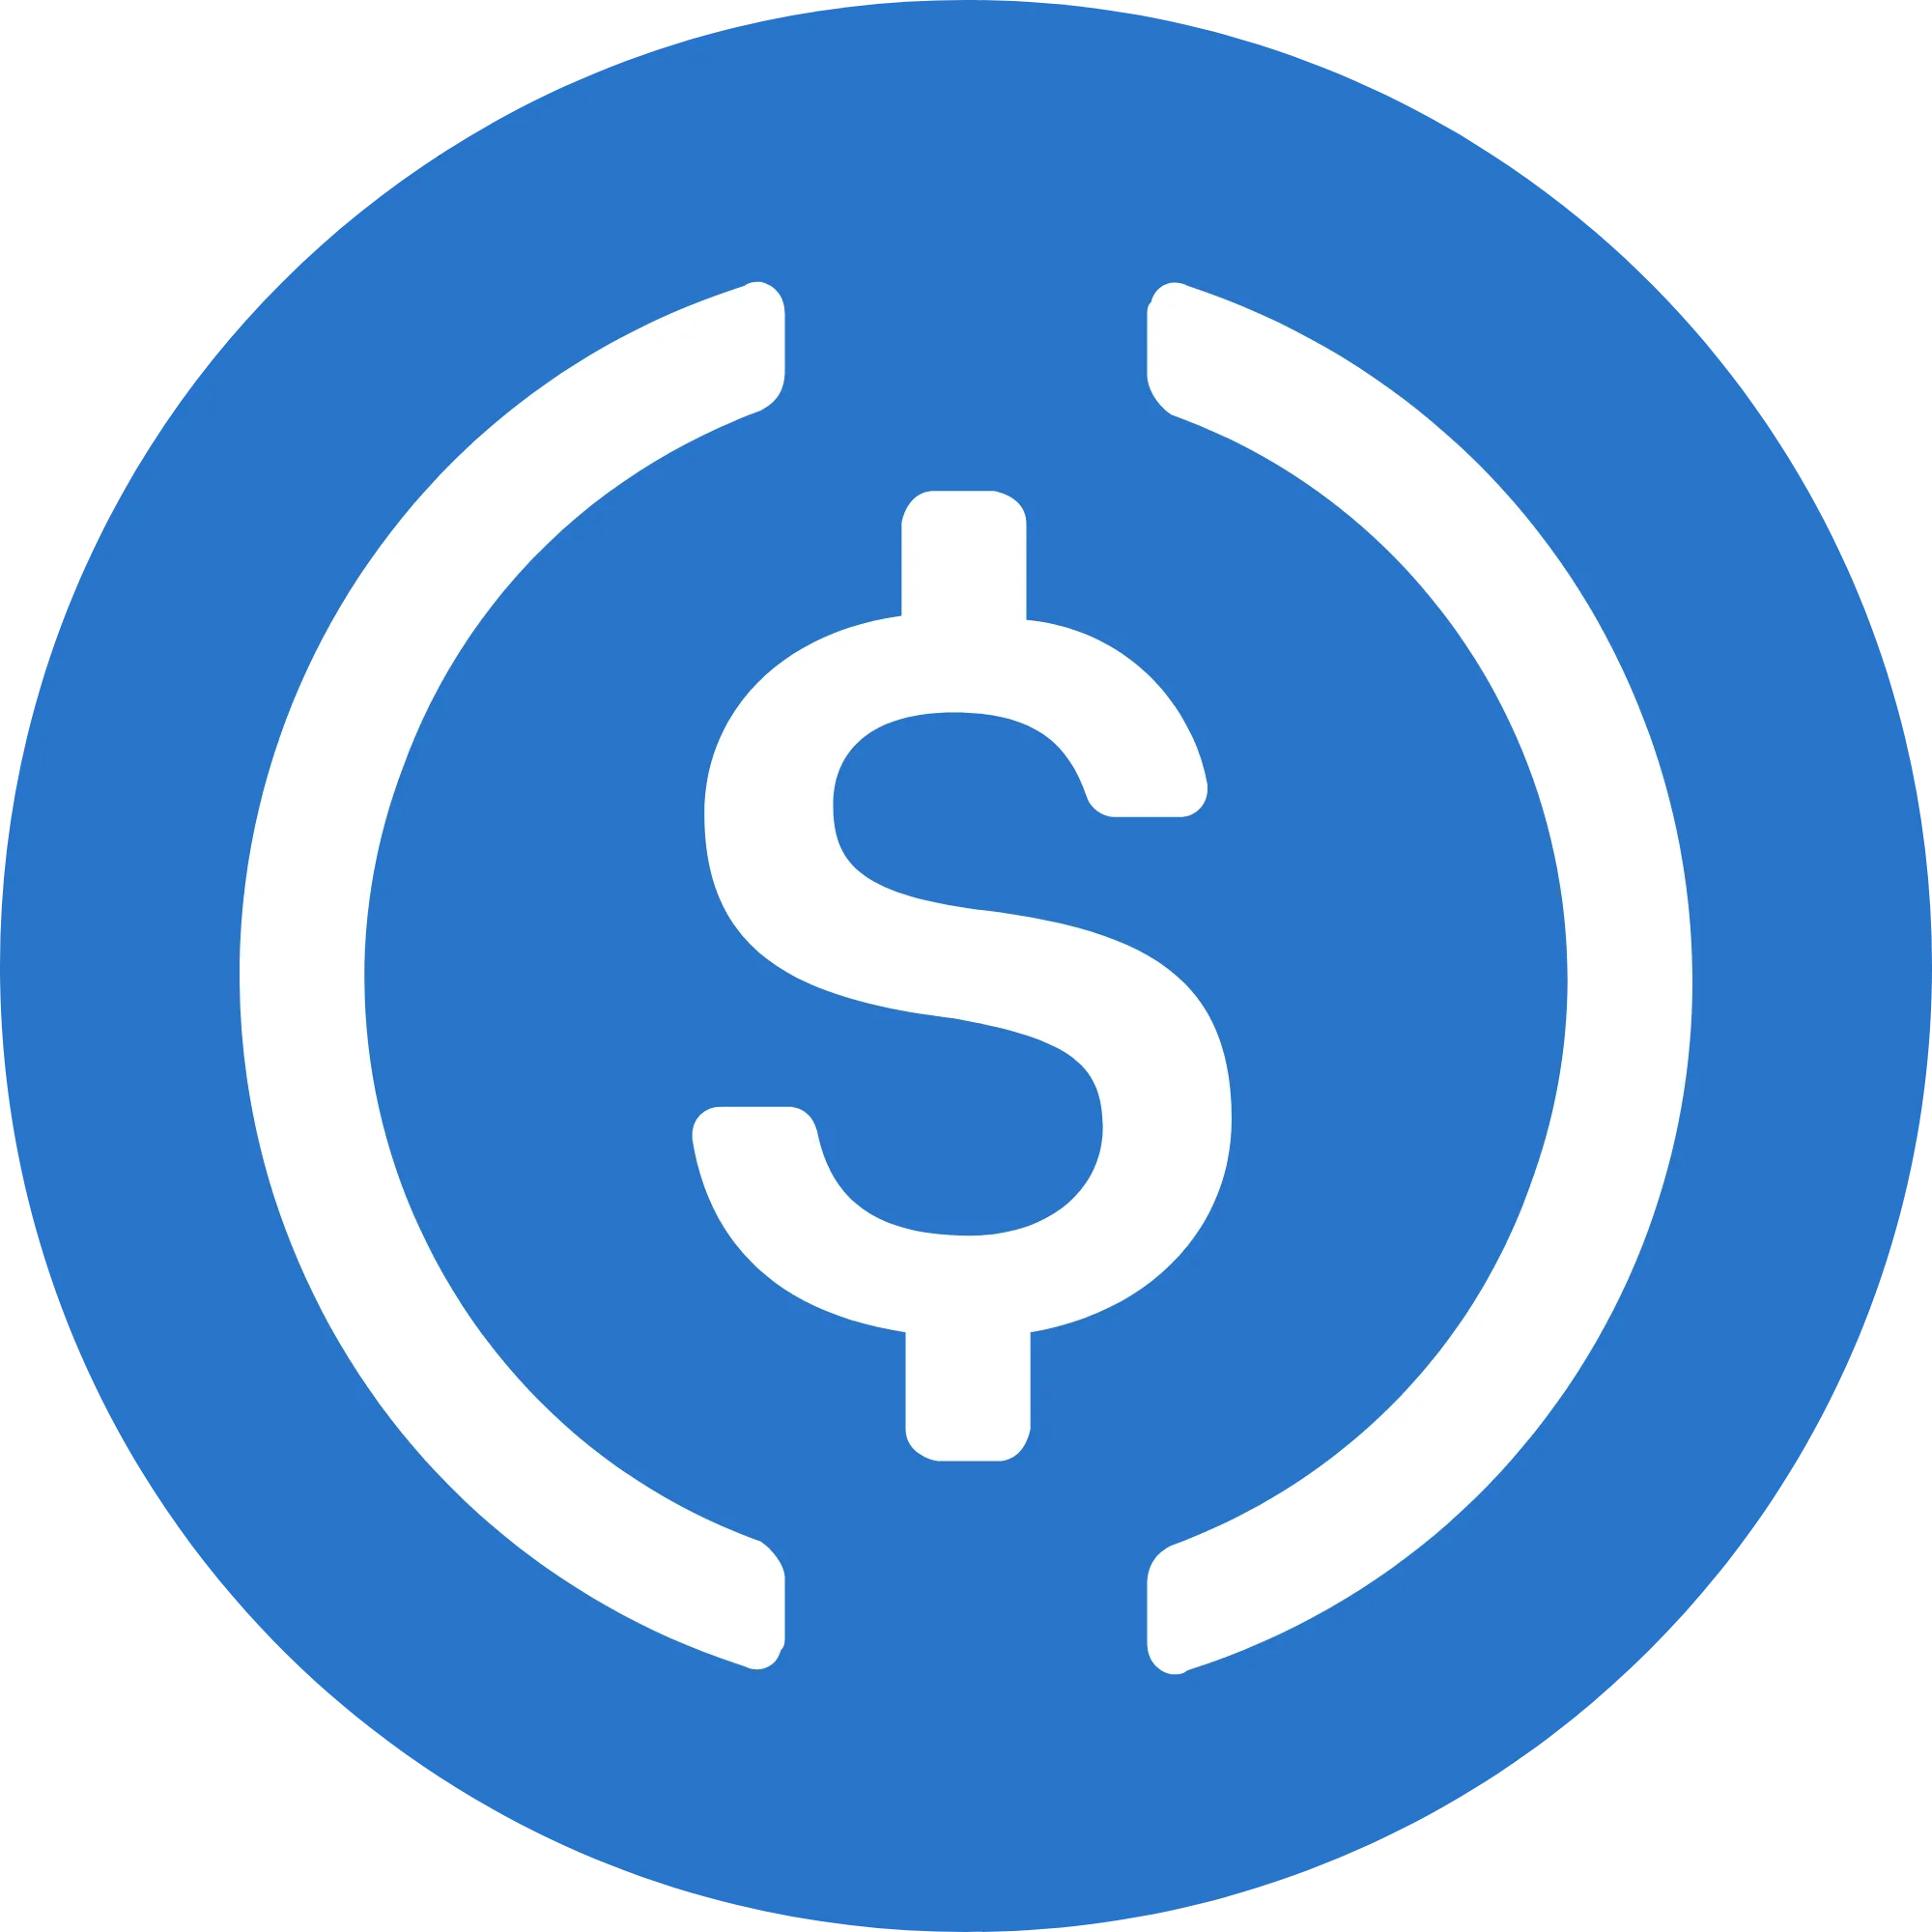 USD Coin logo in svg format